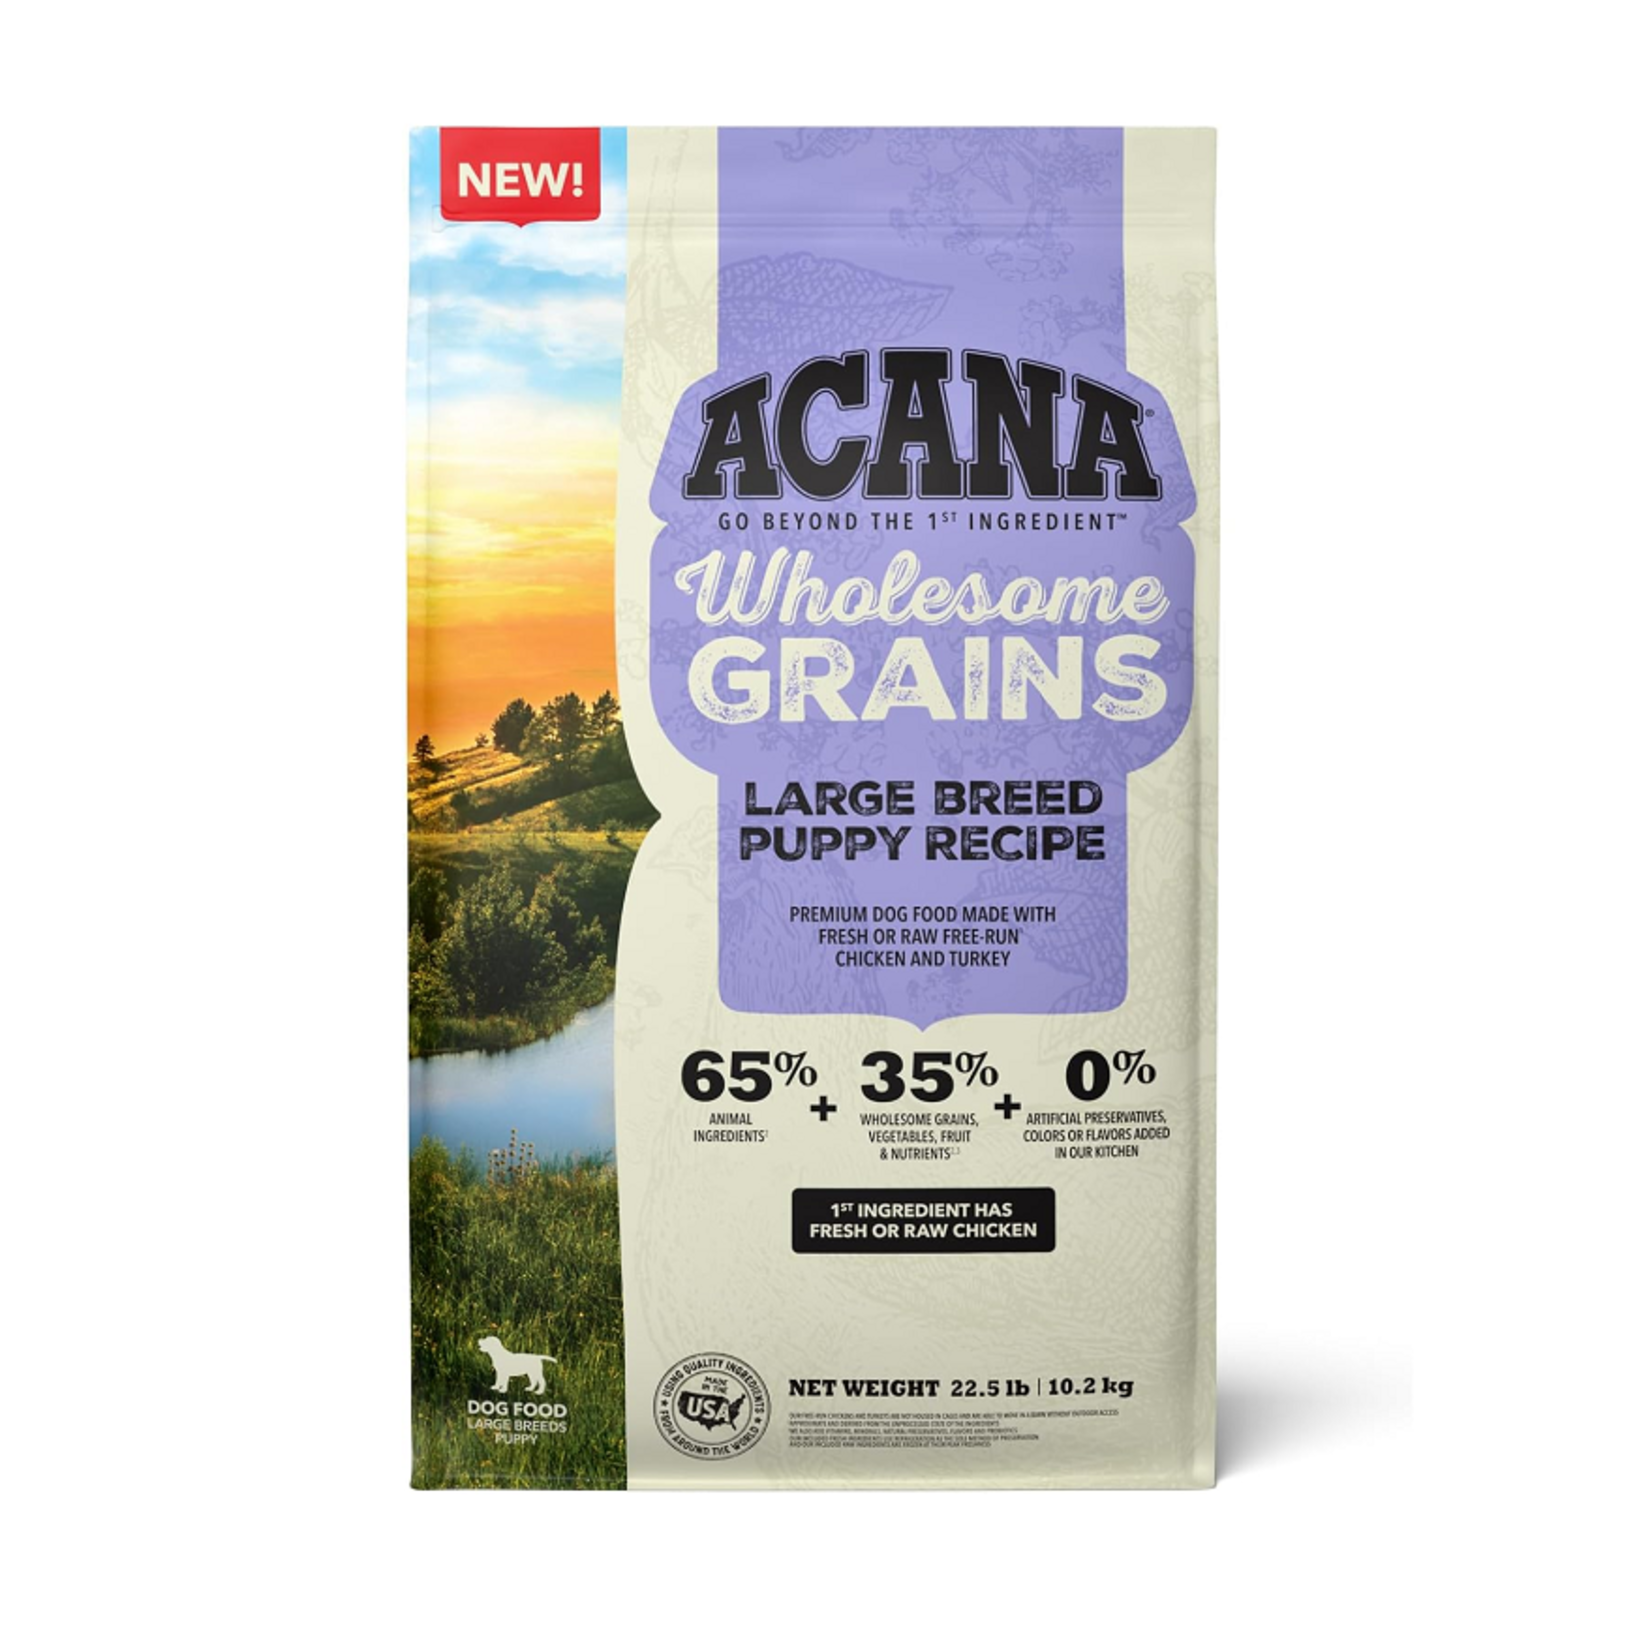 Acana Puppy / Large Breed - Wholesome Grains - Acana - Dog